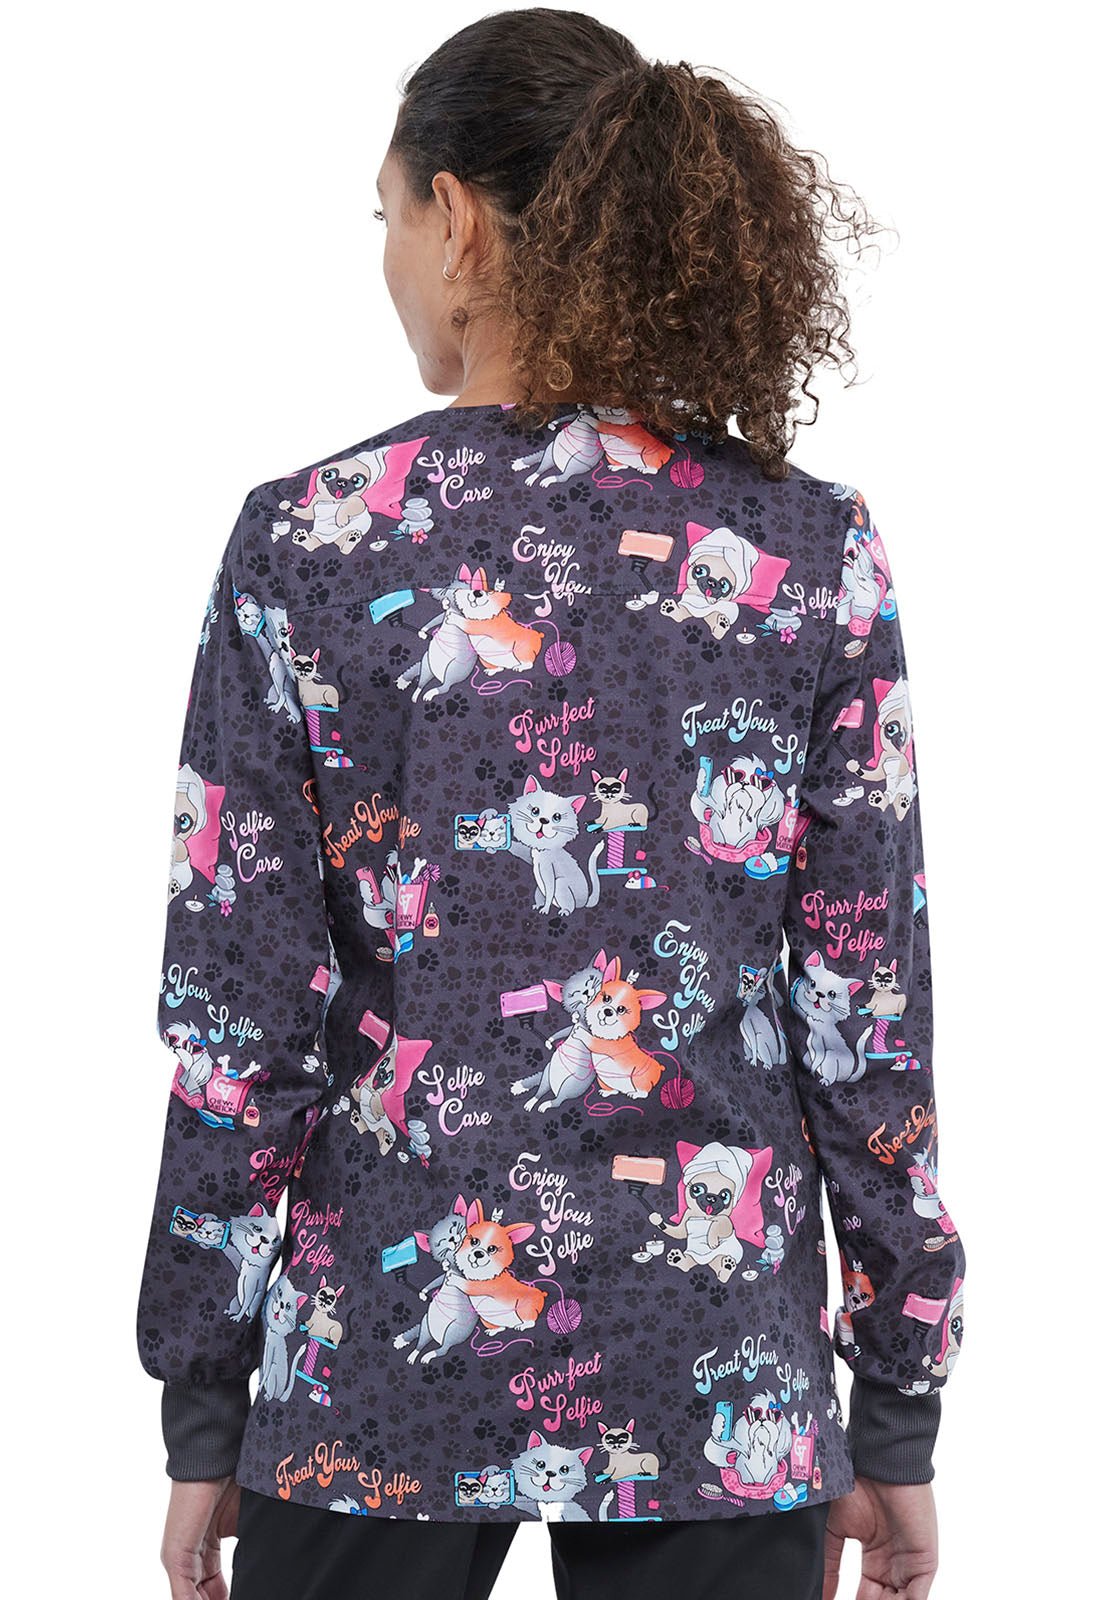 Cats and Dogs Print Warm Up Scrub Jacket CK301 SFEC - Scrubs Select